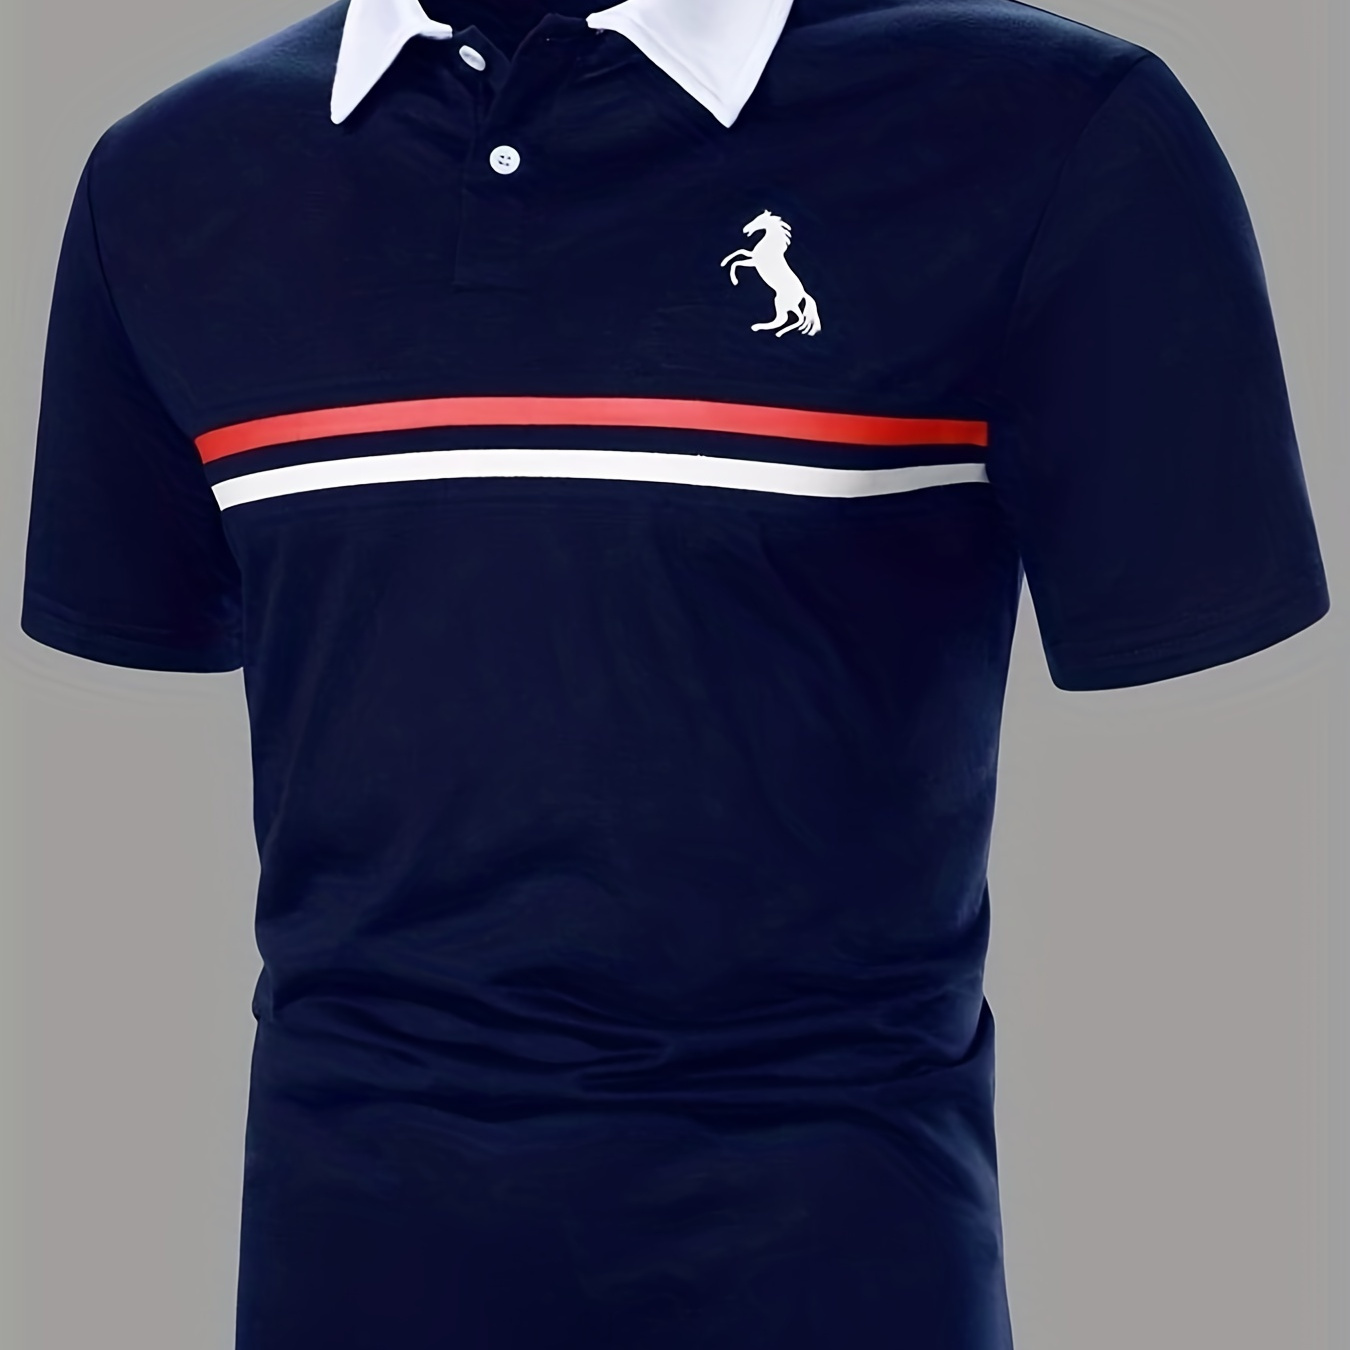 

Stripe & Horse Print Men's Short Sleeve Polo Shirt, Comfy Casual Male Shirt For Golf Sports, Gift For Men